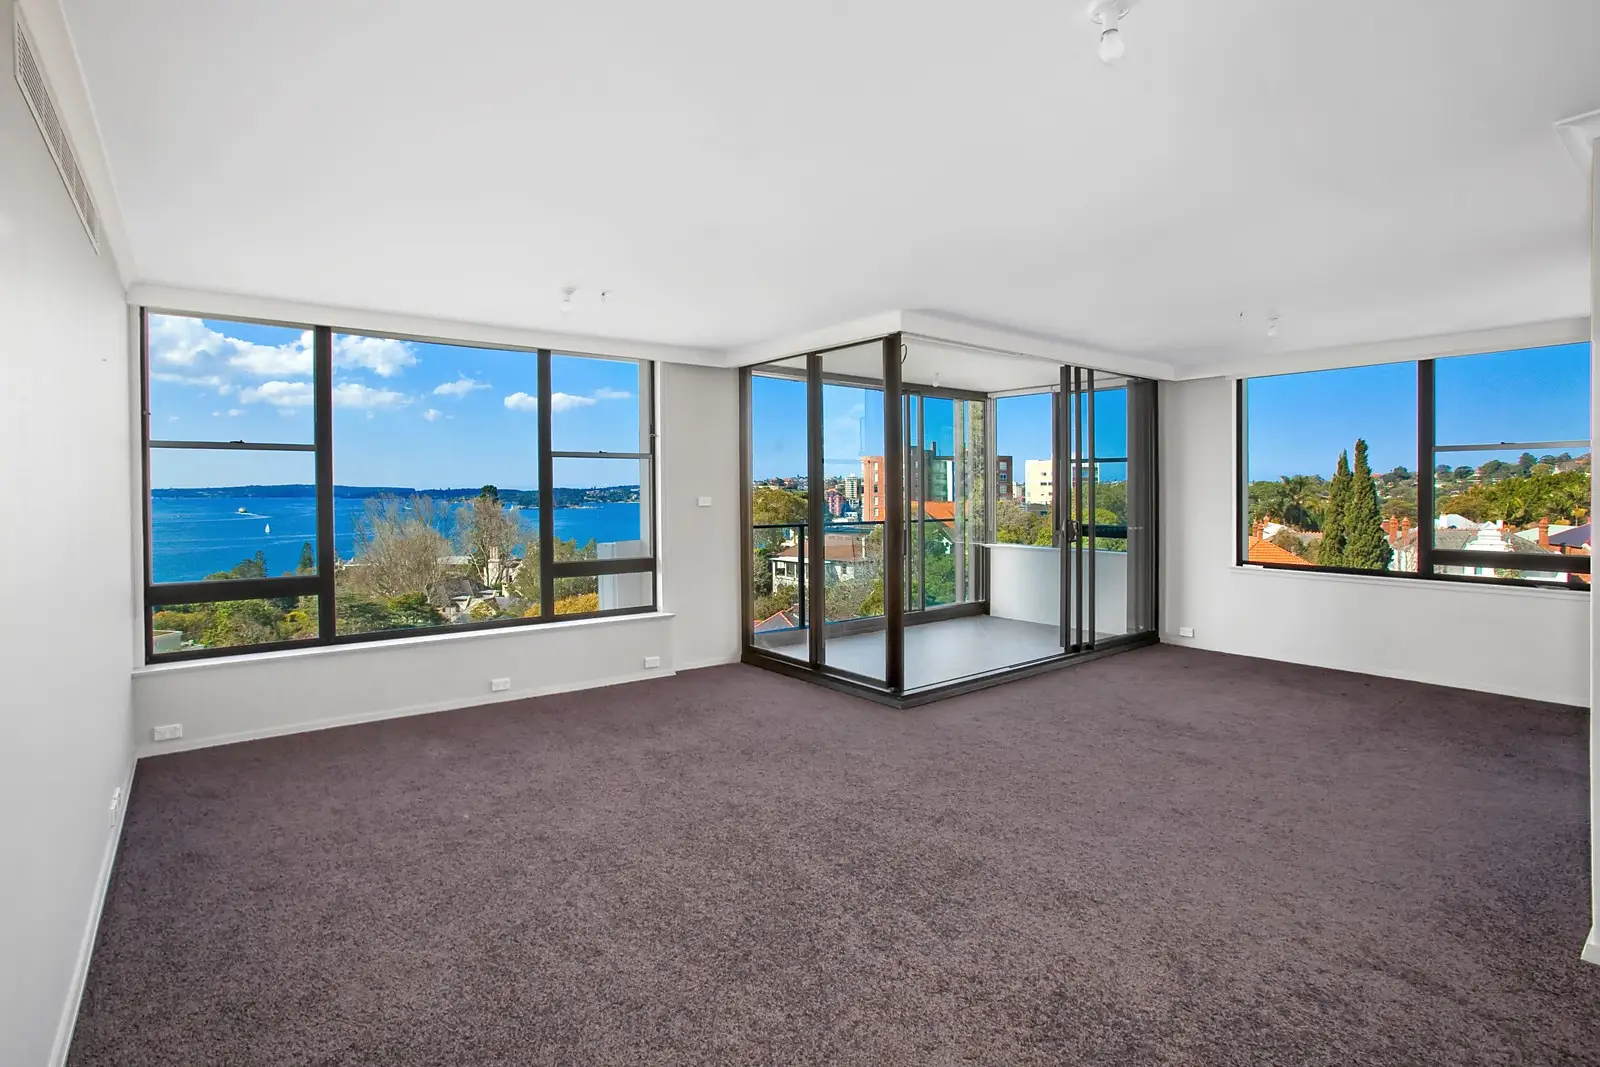 Photo #2: 5C/5-11 Thornton Street, Darling Point - Sold by Sydney Sotheby's International Realty